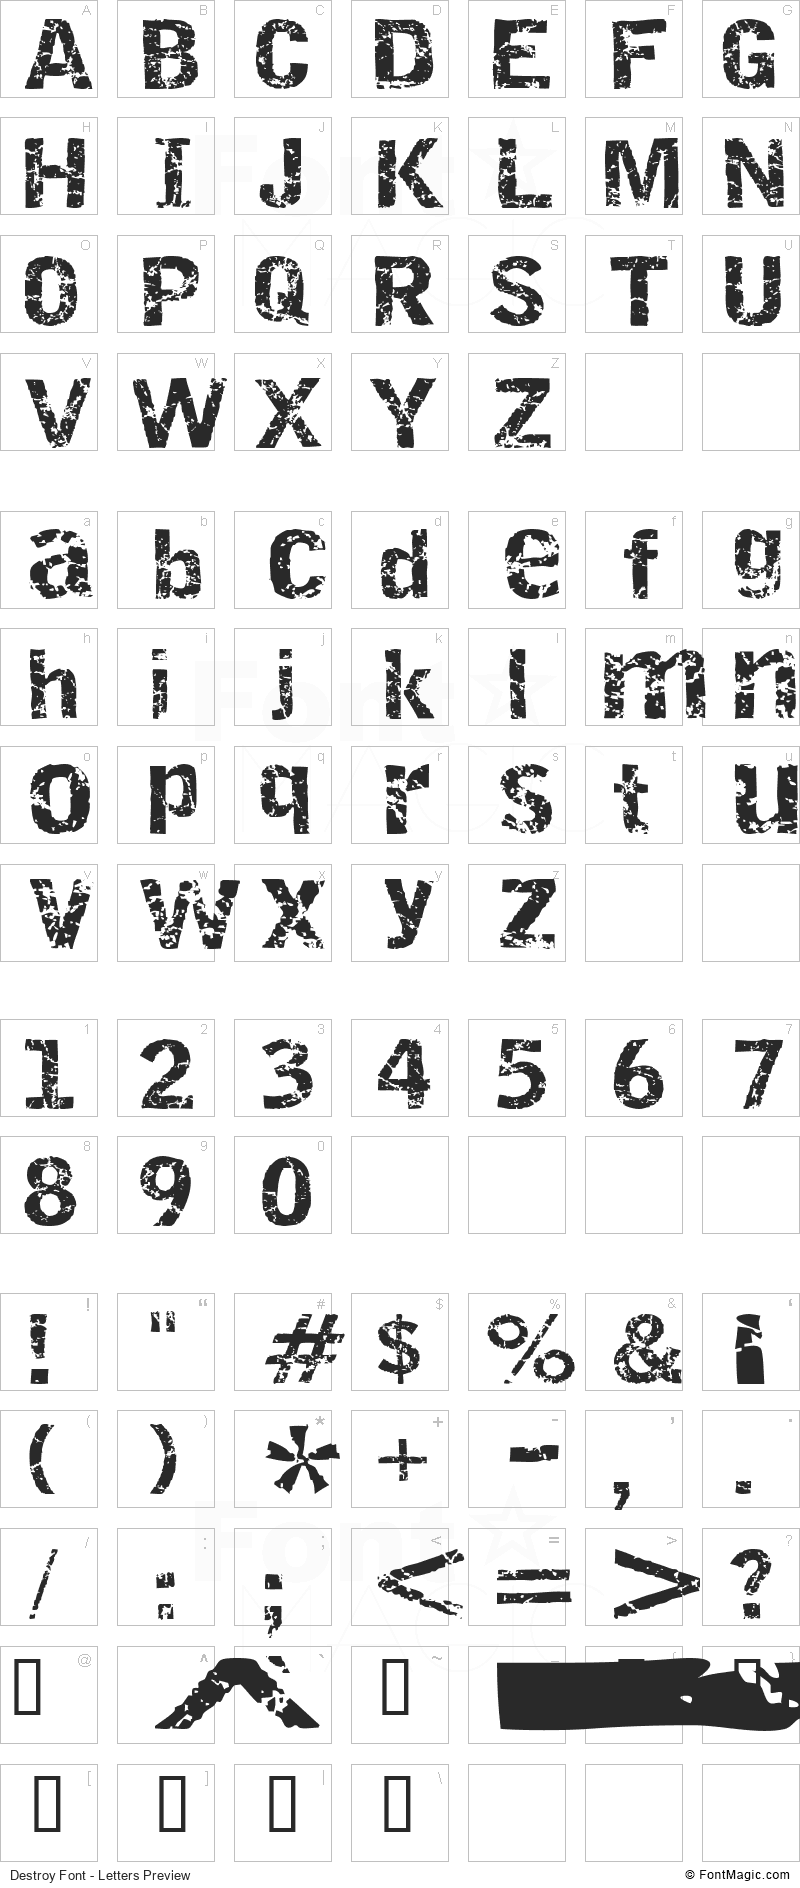 Destroy Font - All Latters Preview Chart